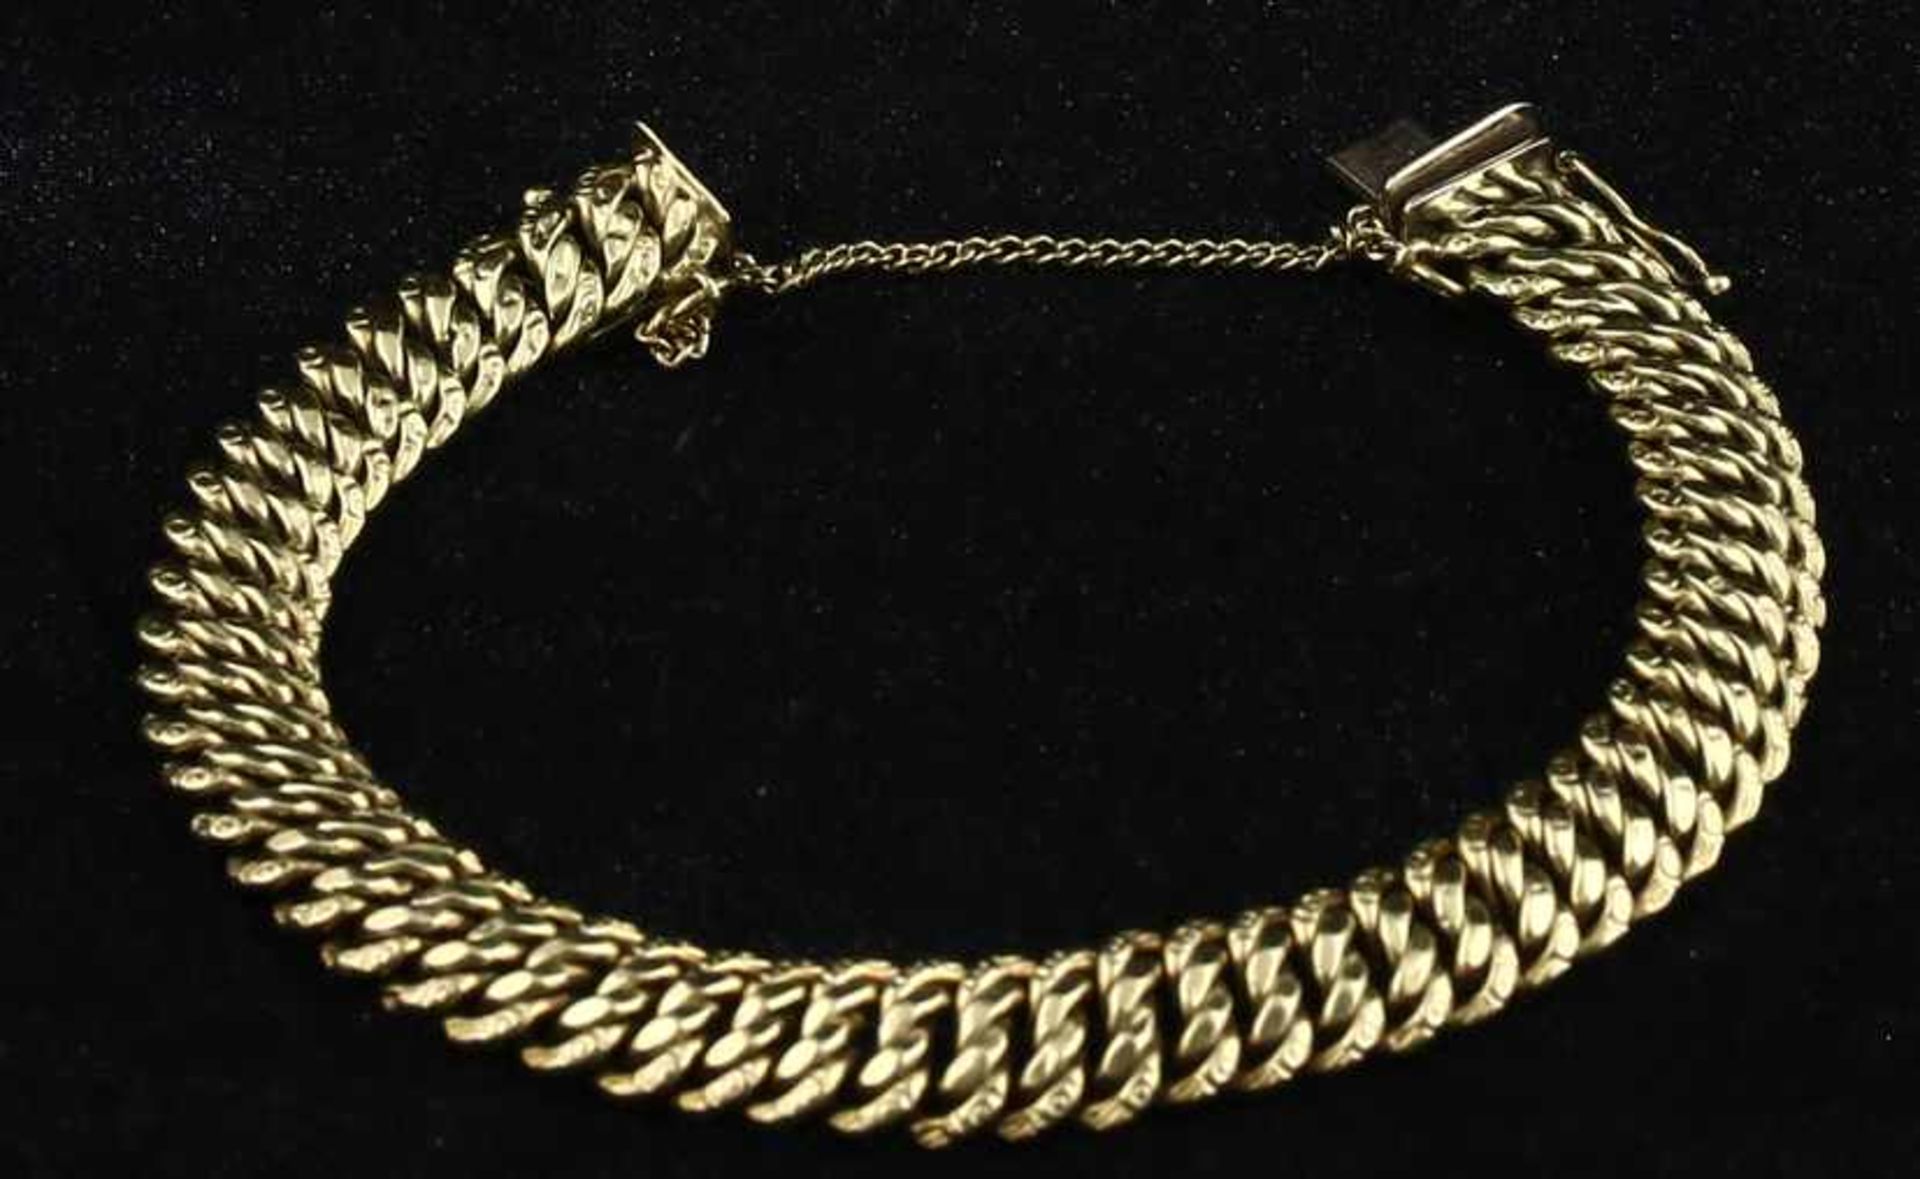 14k yellow gold braided-link bracelet with partially engraved links - 20 cm -